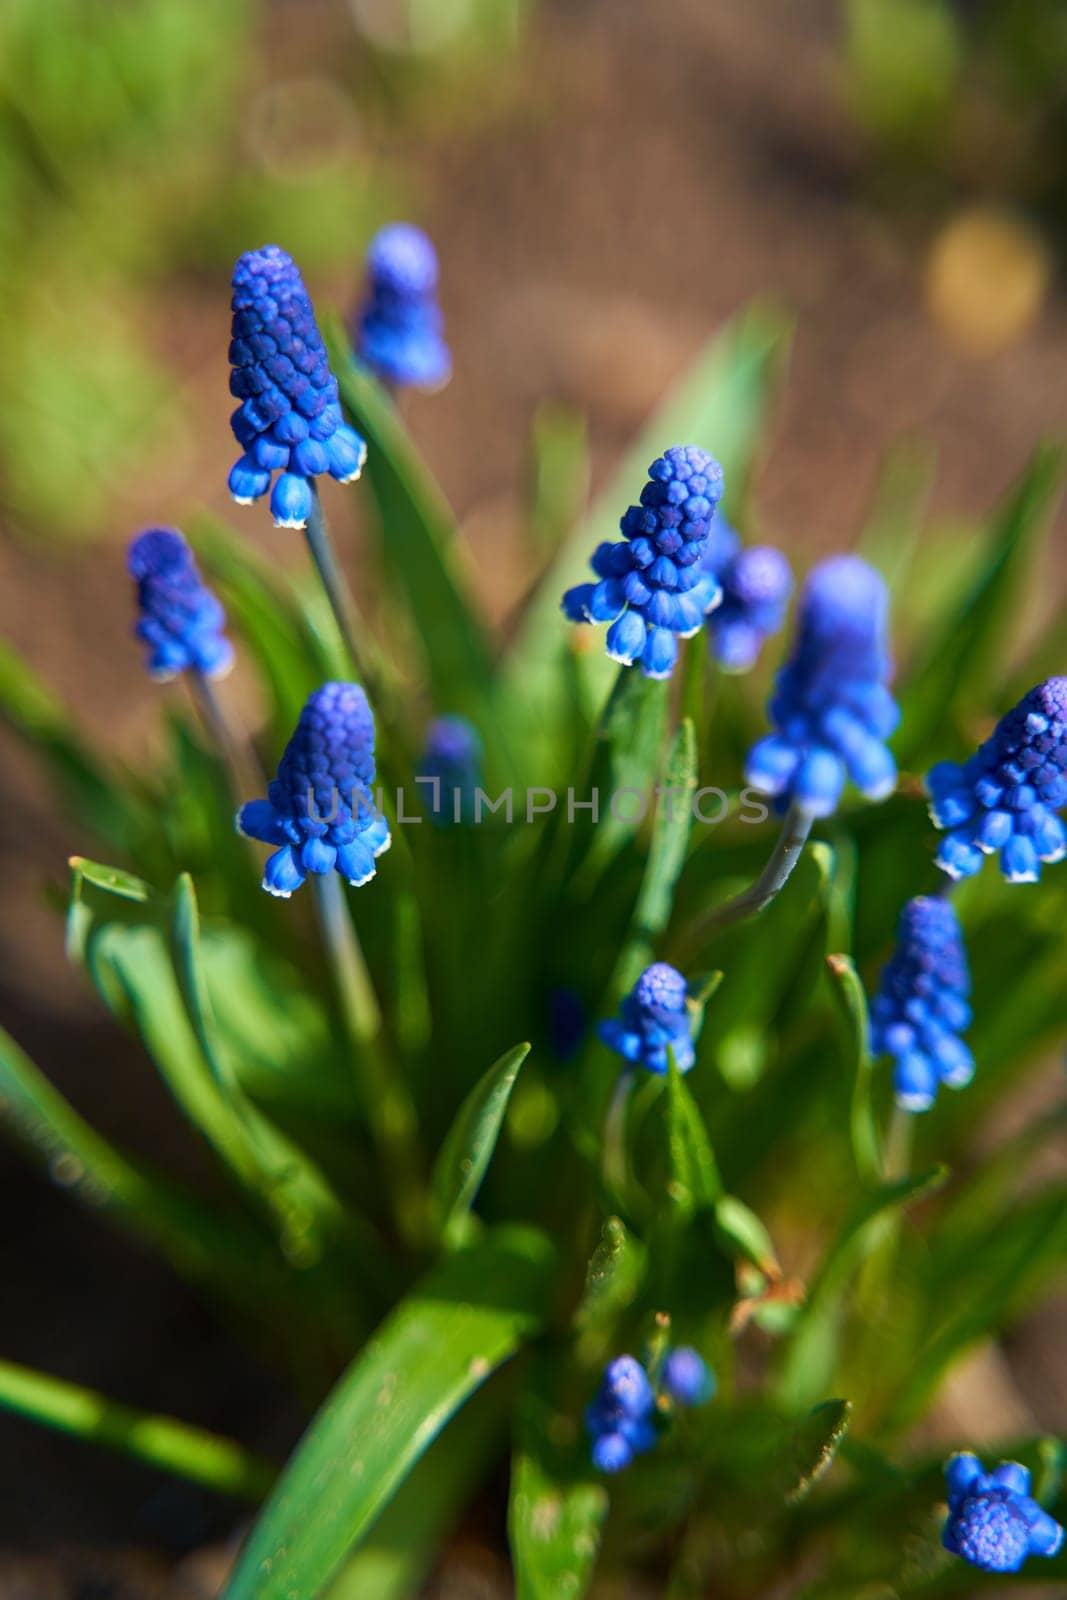 blue hyacinth flower blossom in the summer garden by Try_my_best